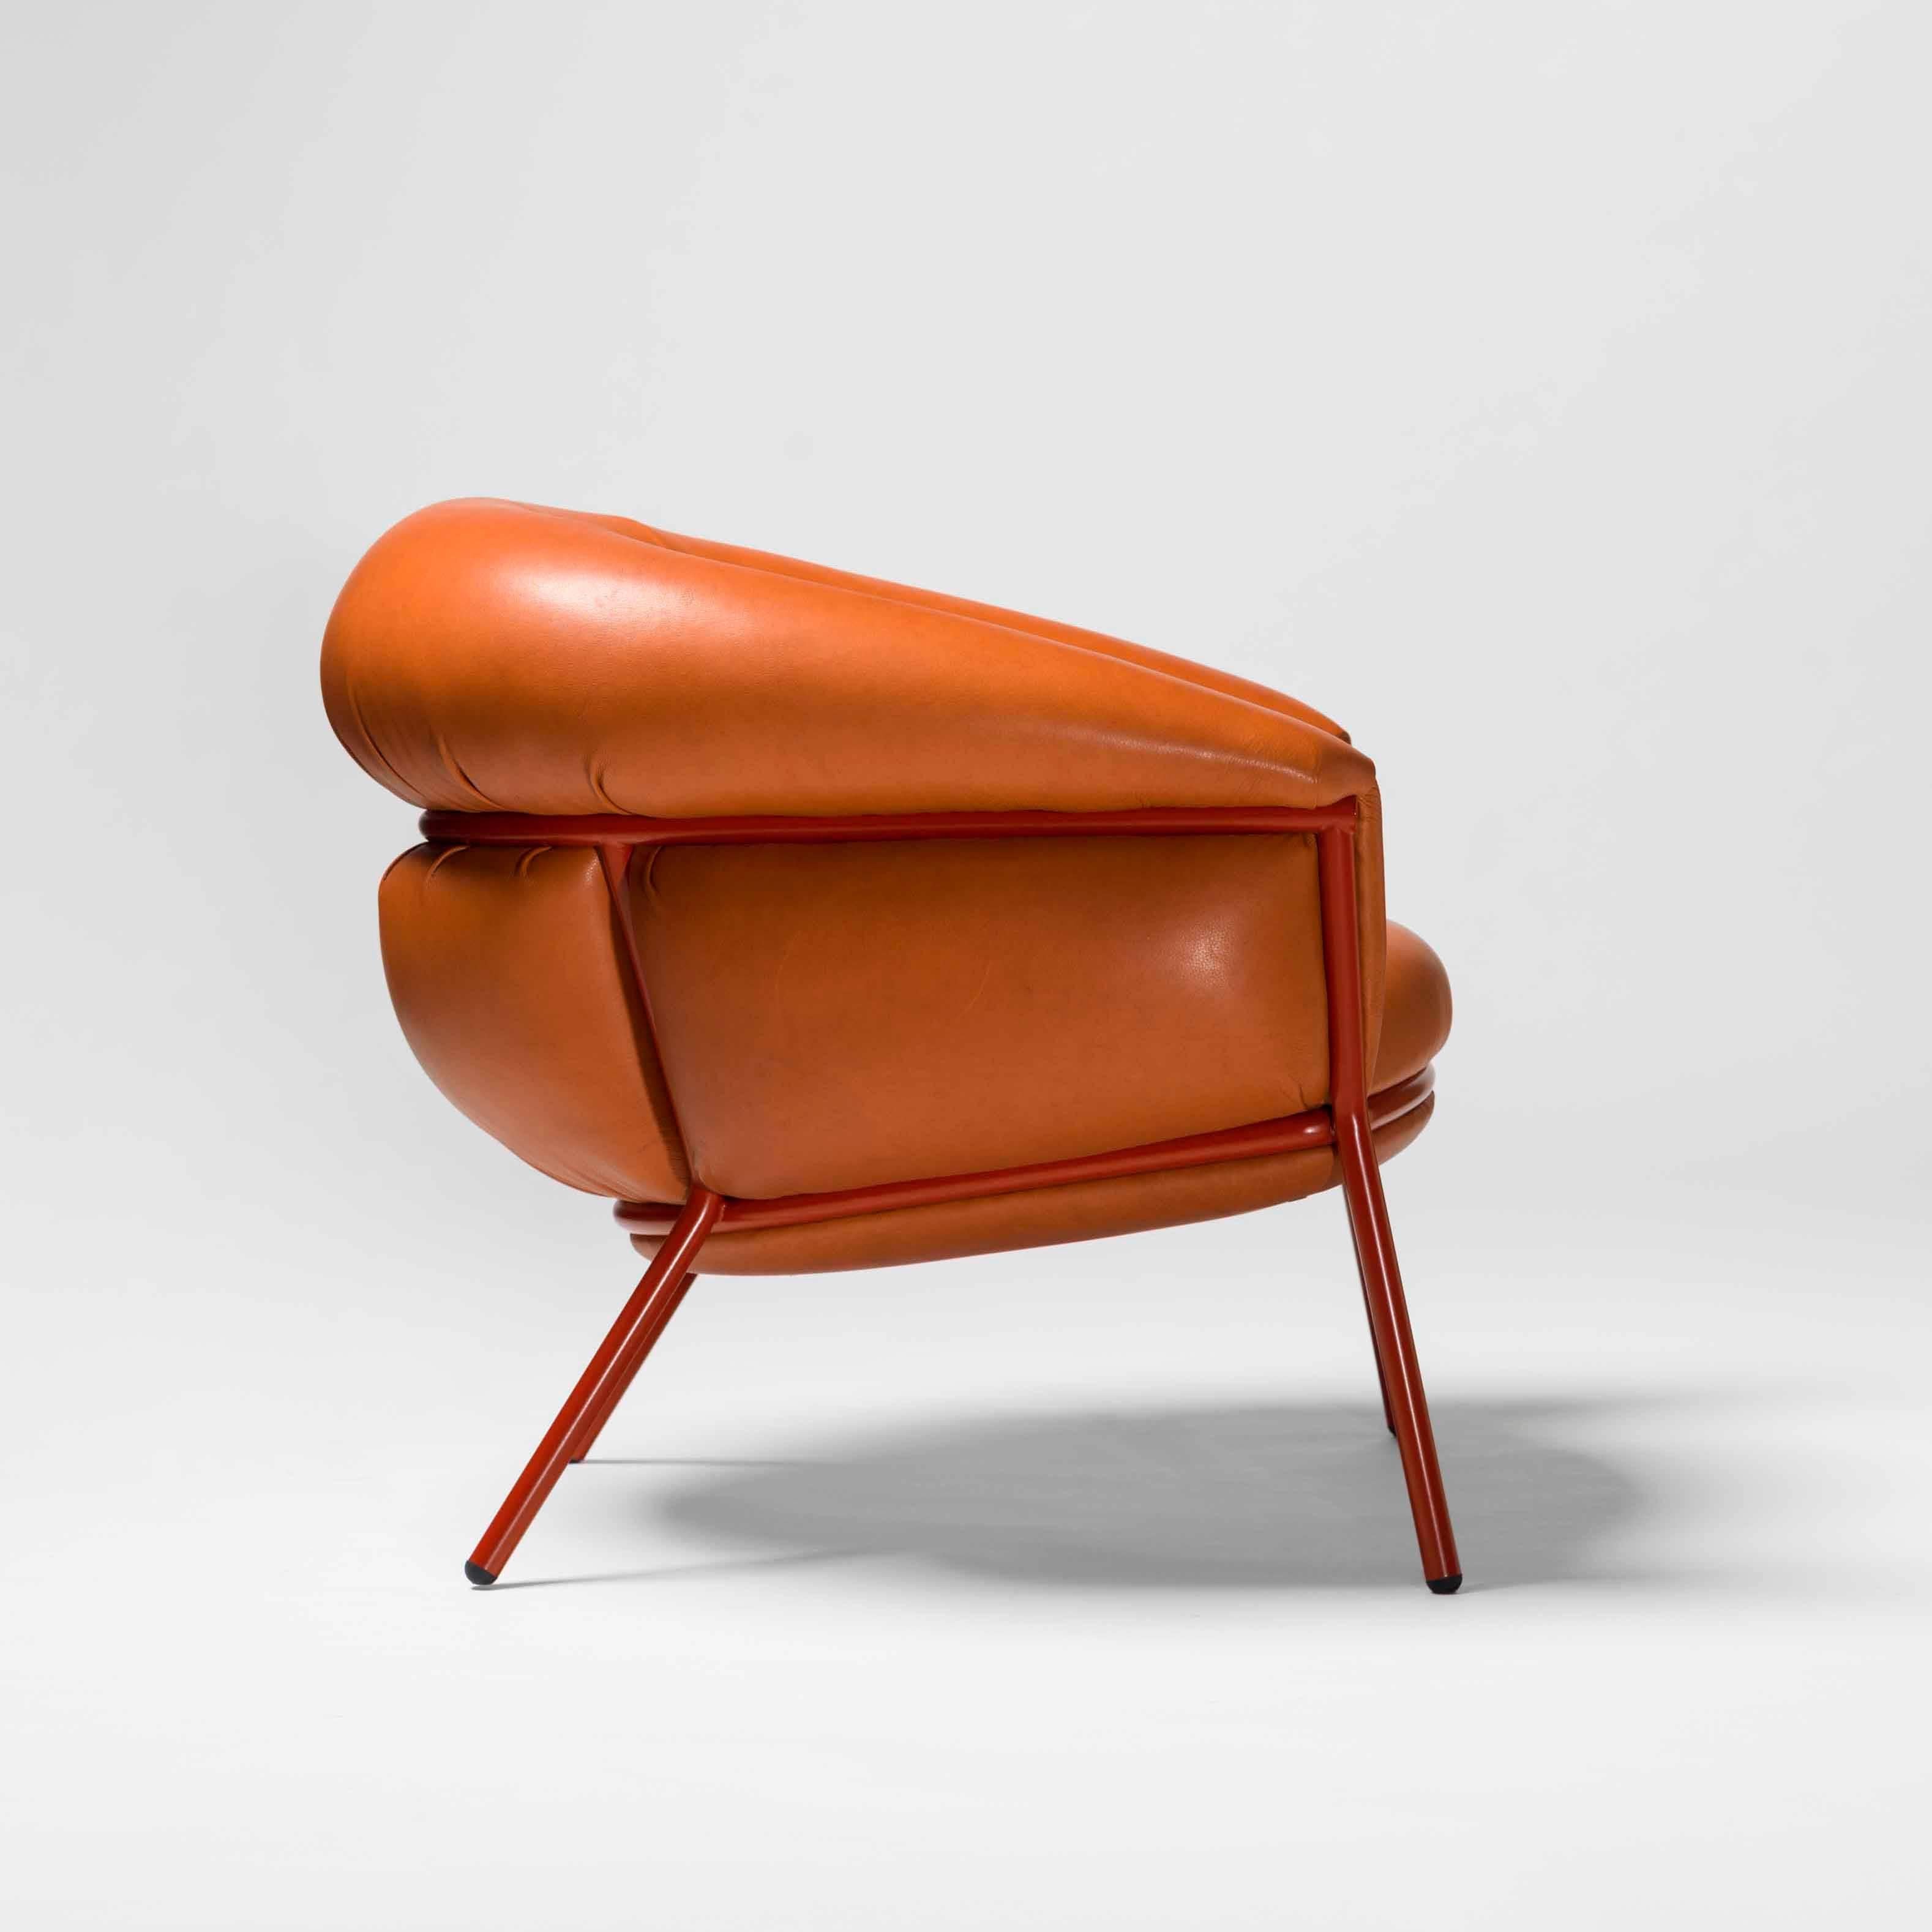 Armchair designed by Stephen Bruks manufactured by BD Barcelona.

An iron tubular (25mm) structured armchair. Seat and backrest upholstered in leather.

We have the possibility in different colors.

The leather upholstery oozes over the bare